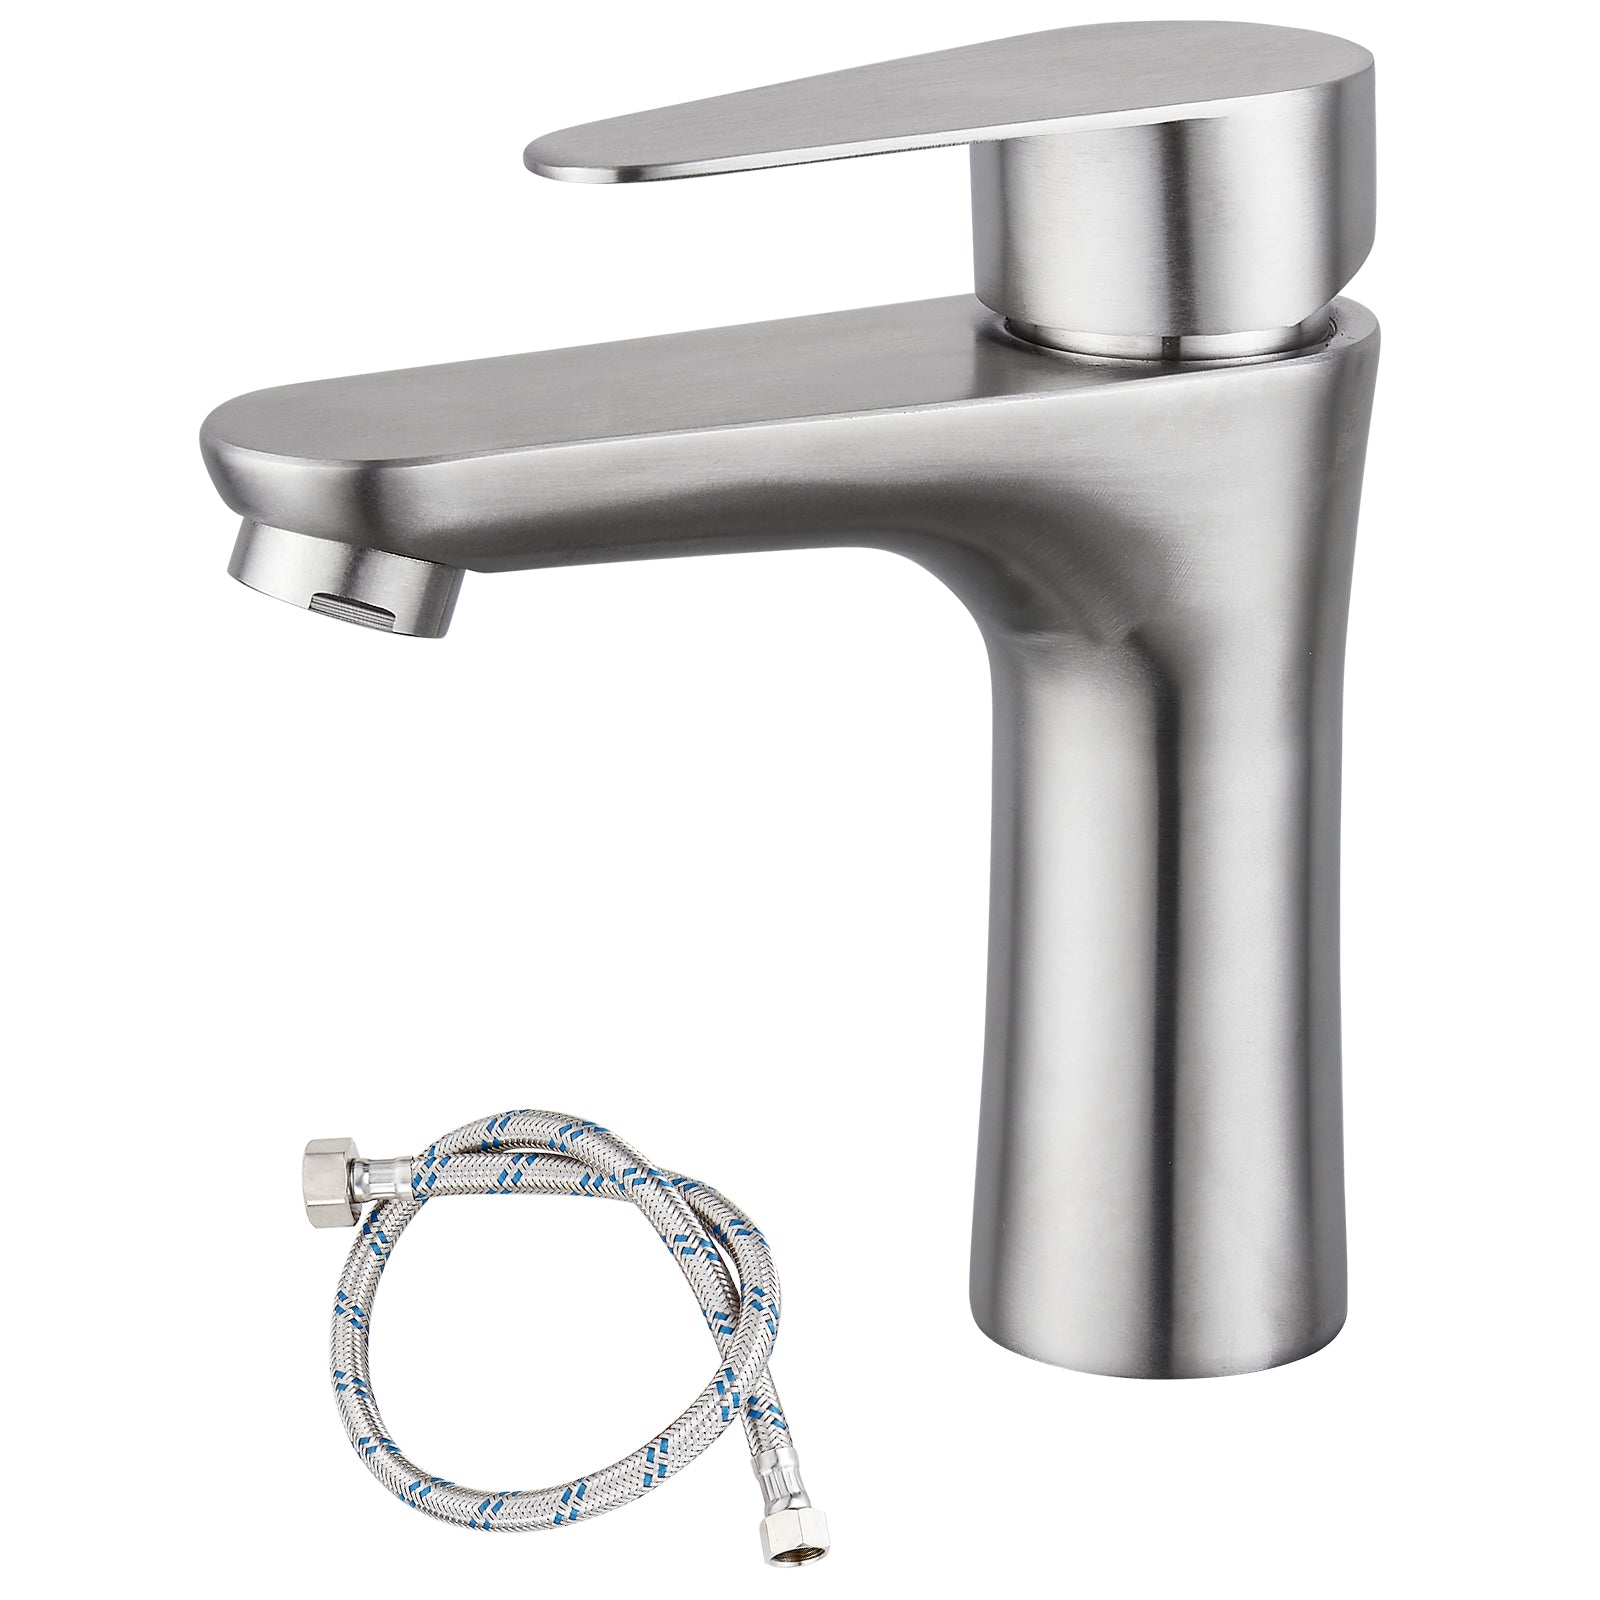 Brushed Nickel Bathroom Faucet Cold Water Only SUS304 Stainless Steel Single Handle One Hole Deck Mounted Lavatory Tap Single Switch 3/8" Hose with Male 3/8" - Female 1/2" Adapter(Drain not Included)